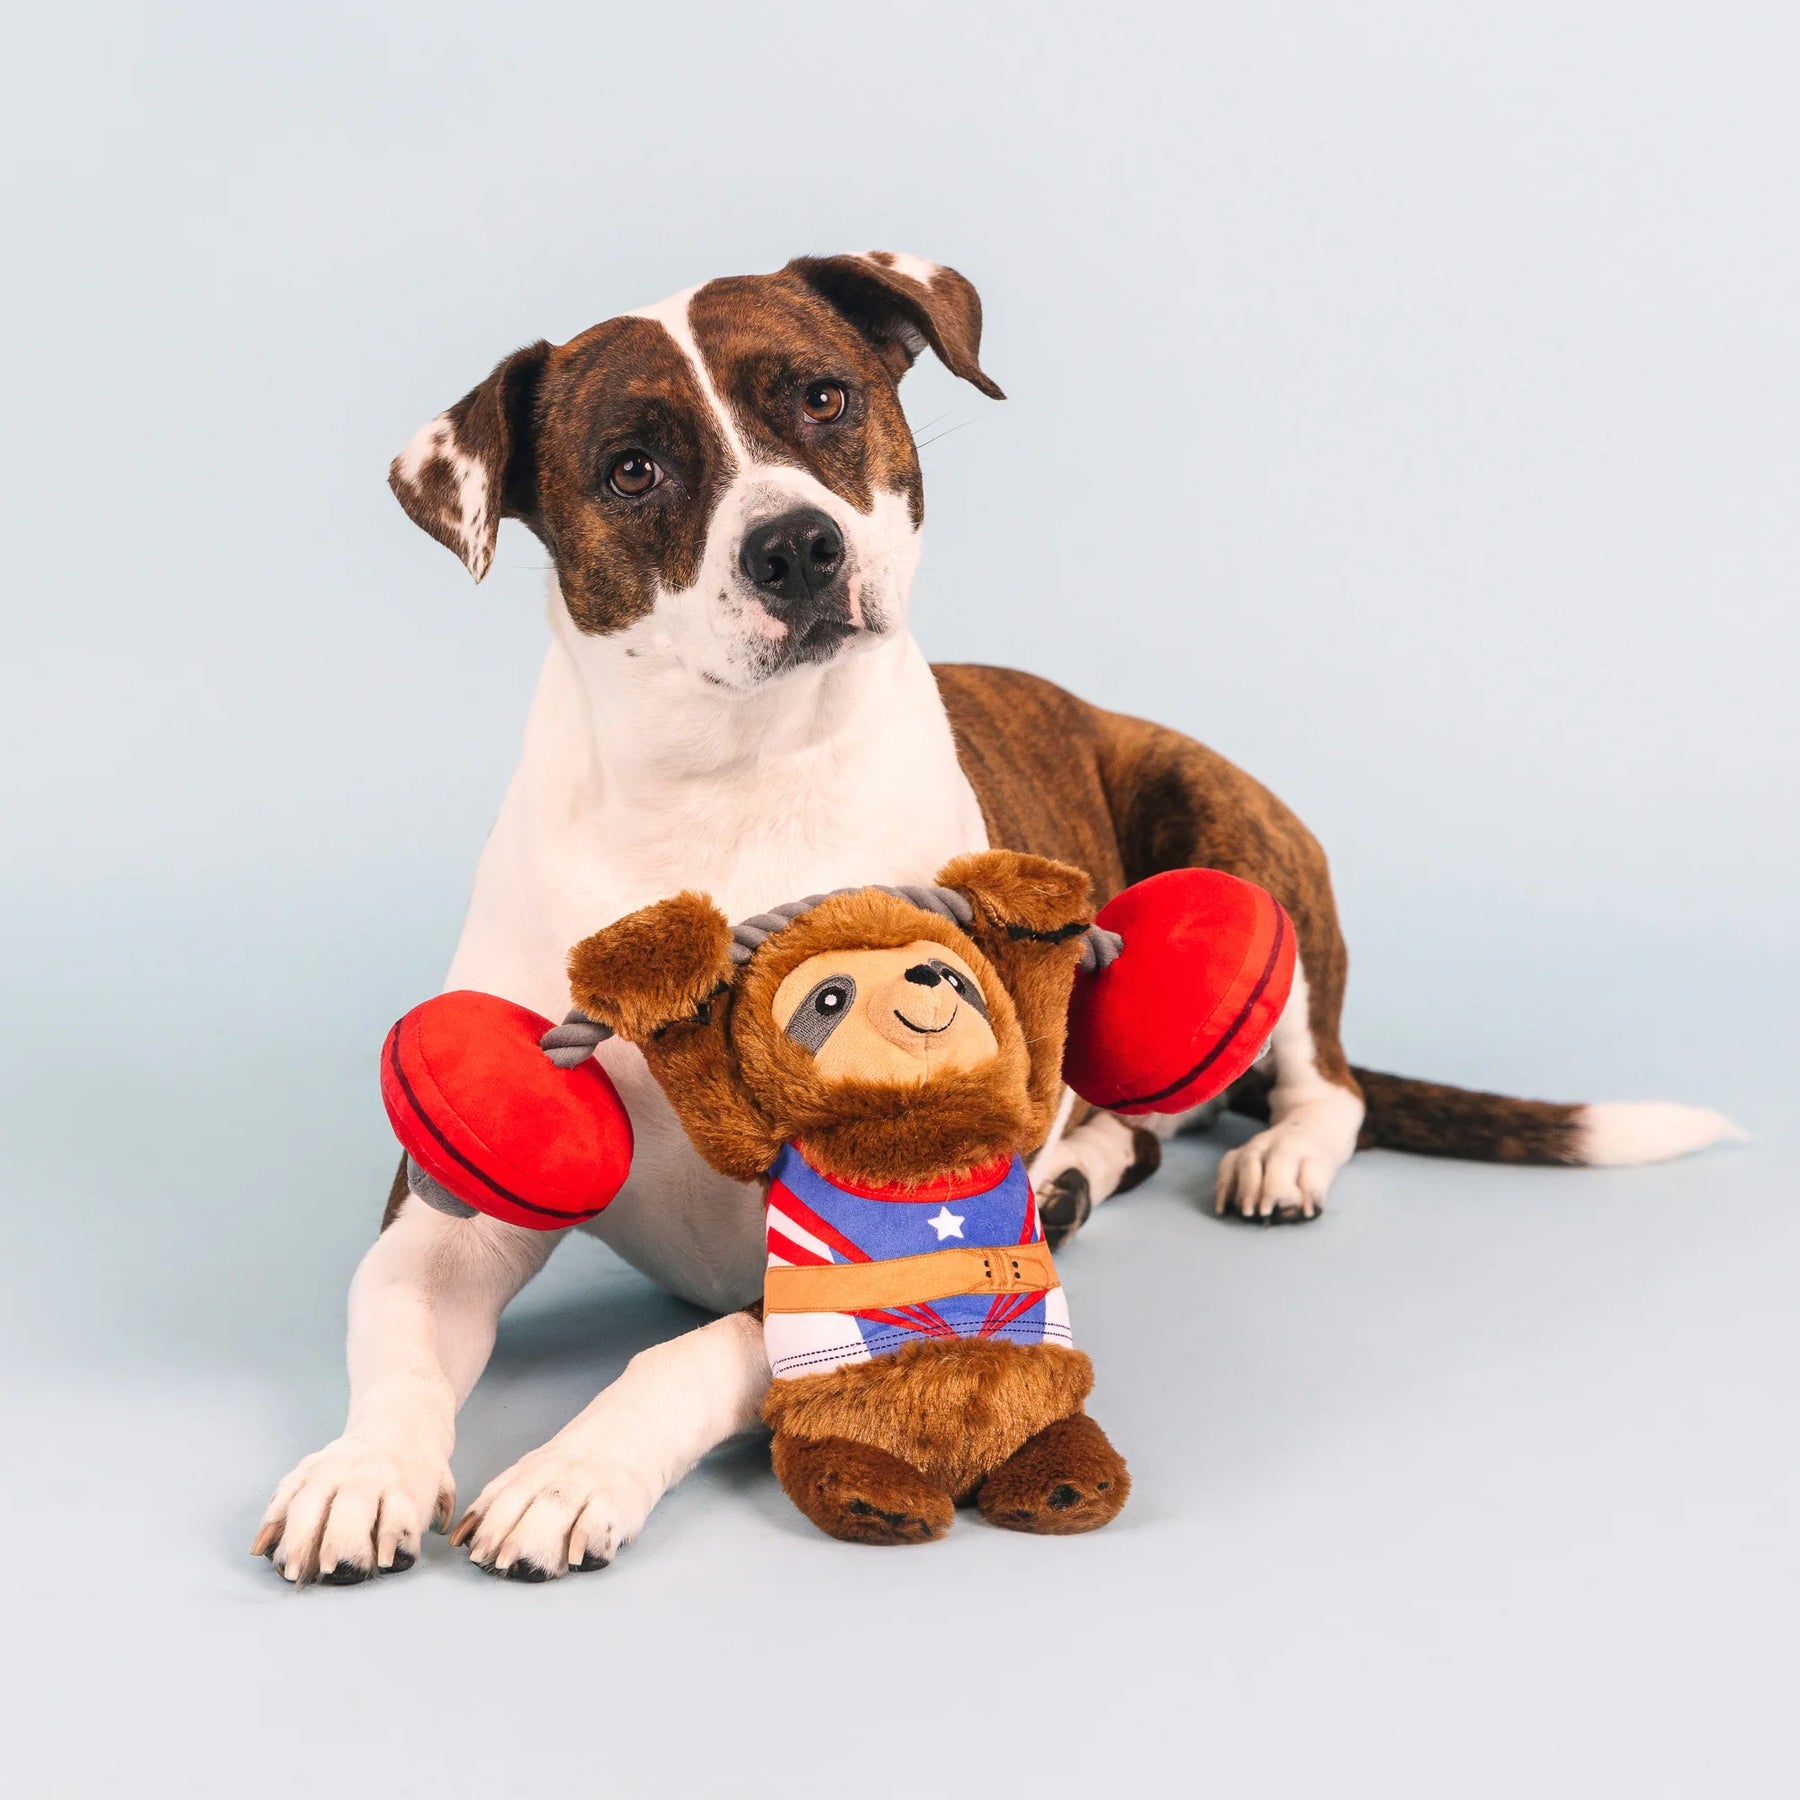 Petshop by Fringe Studio - Dog Toy Hustle for that Muscle